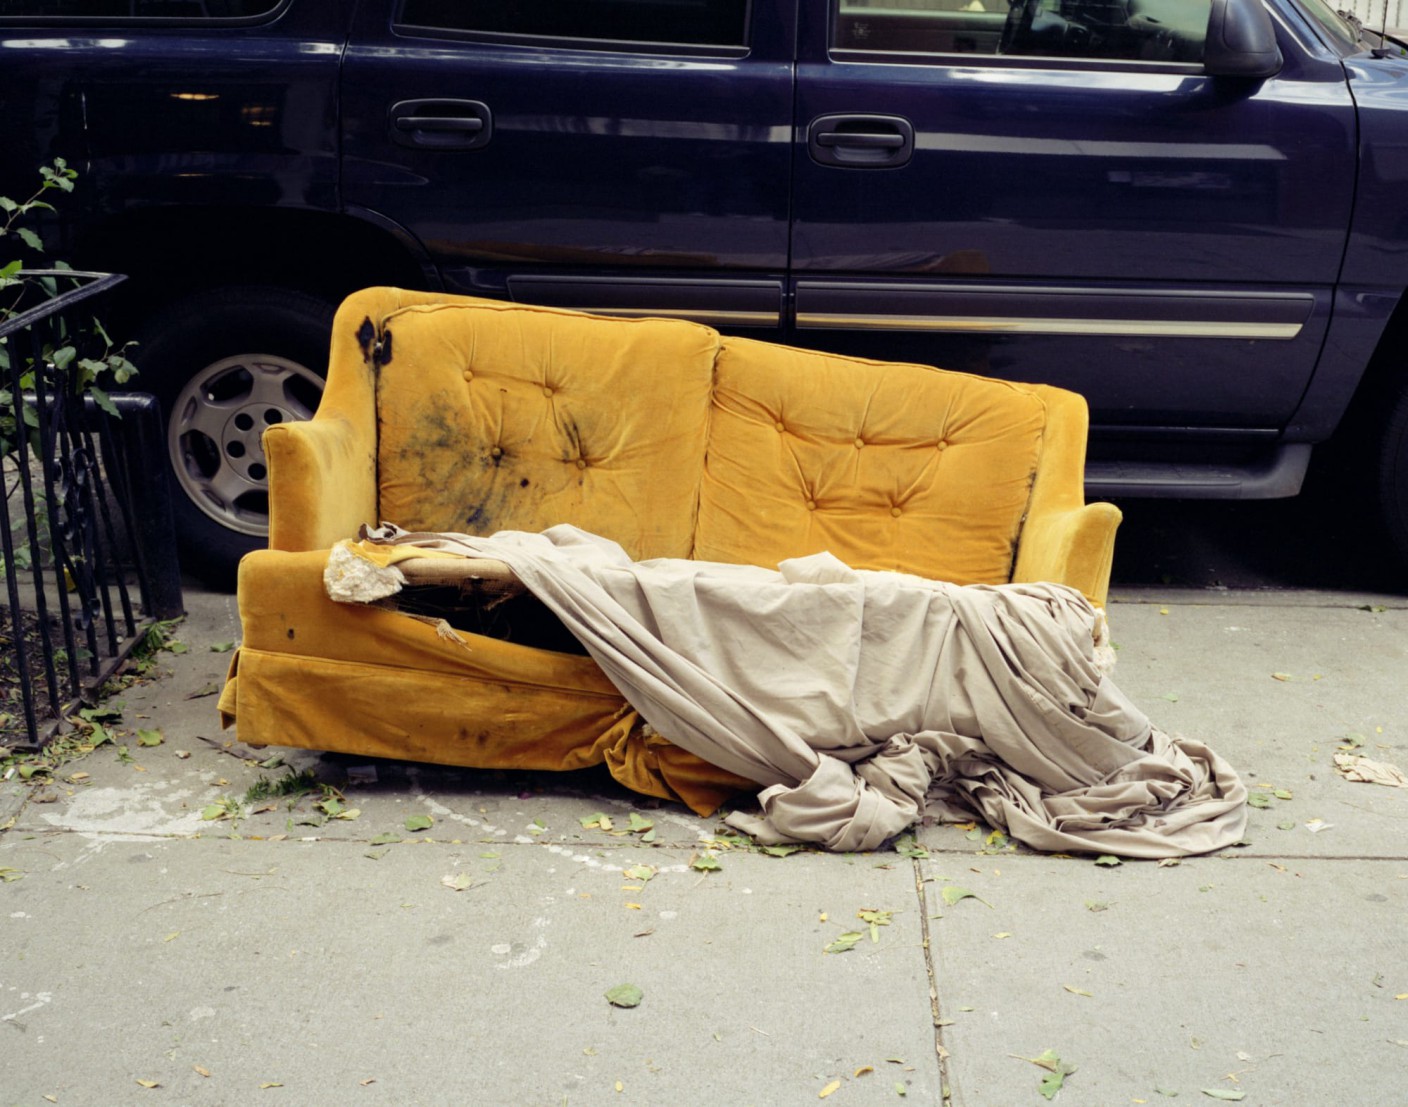 A discarded yellow couch with a white blanket, on a sidewalk